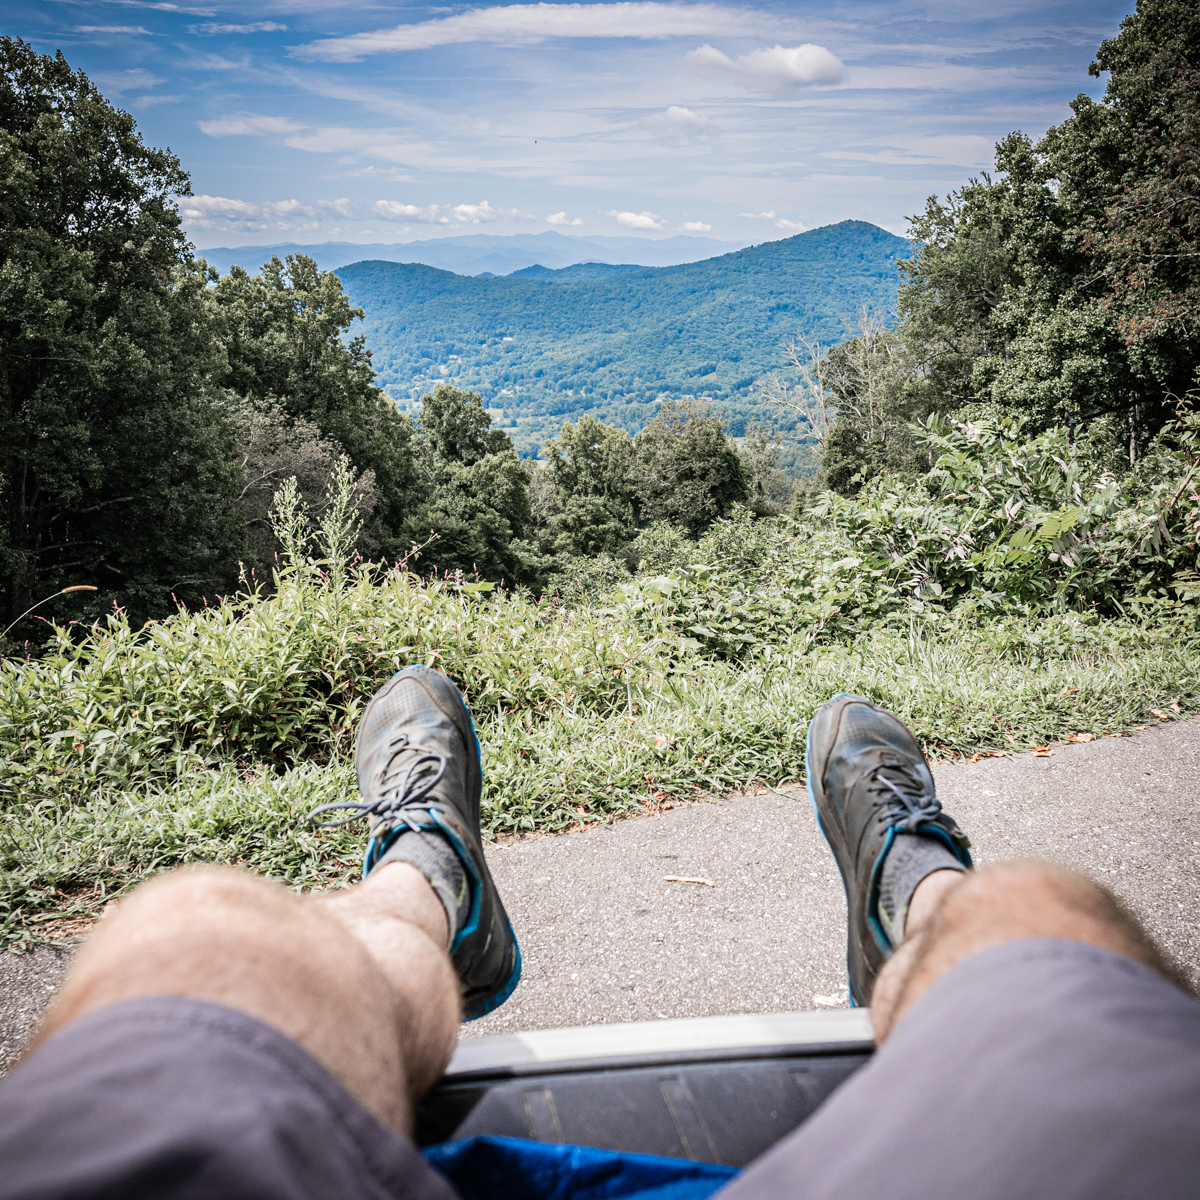 First person view of a hikers legs and feet extended towards the middleground which are a tree-cropped view of the Appalacian mountains